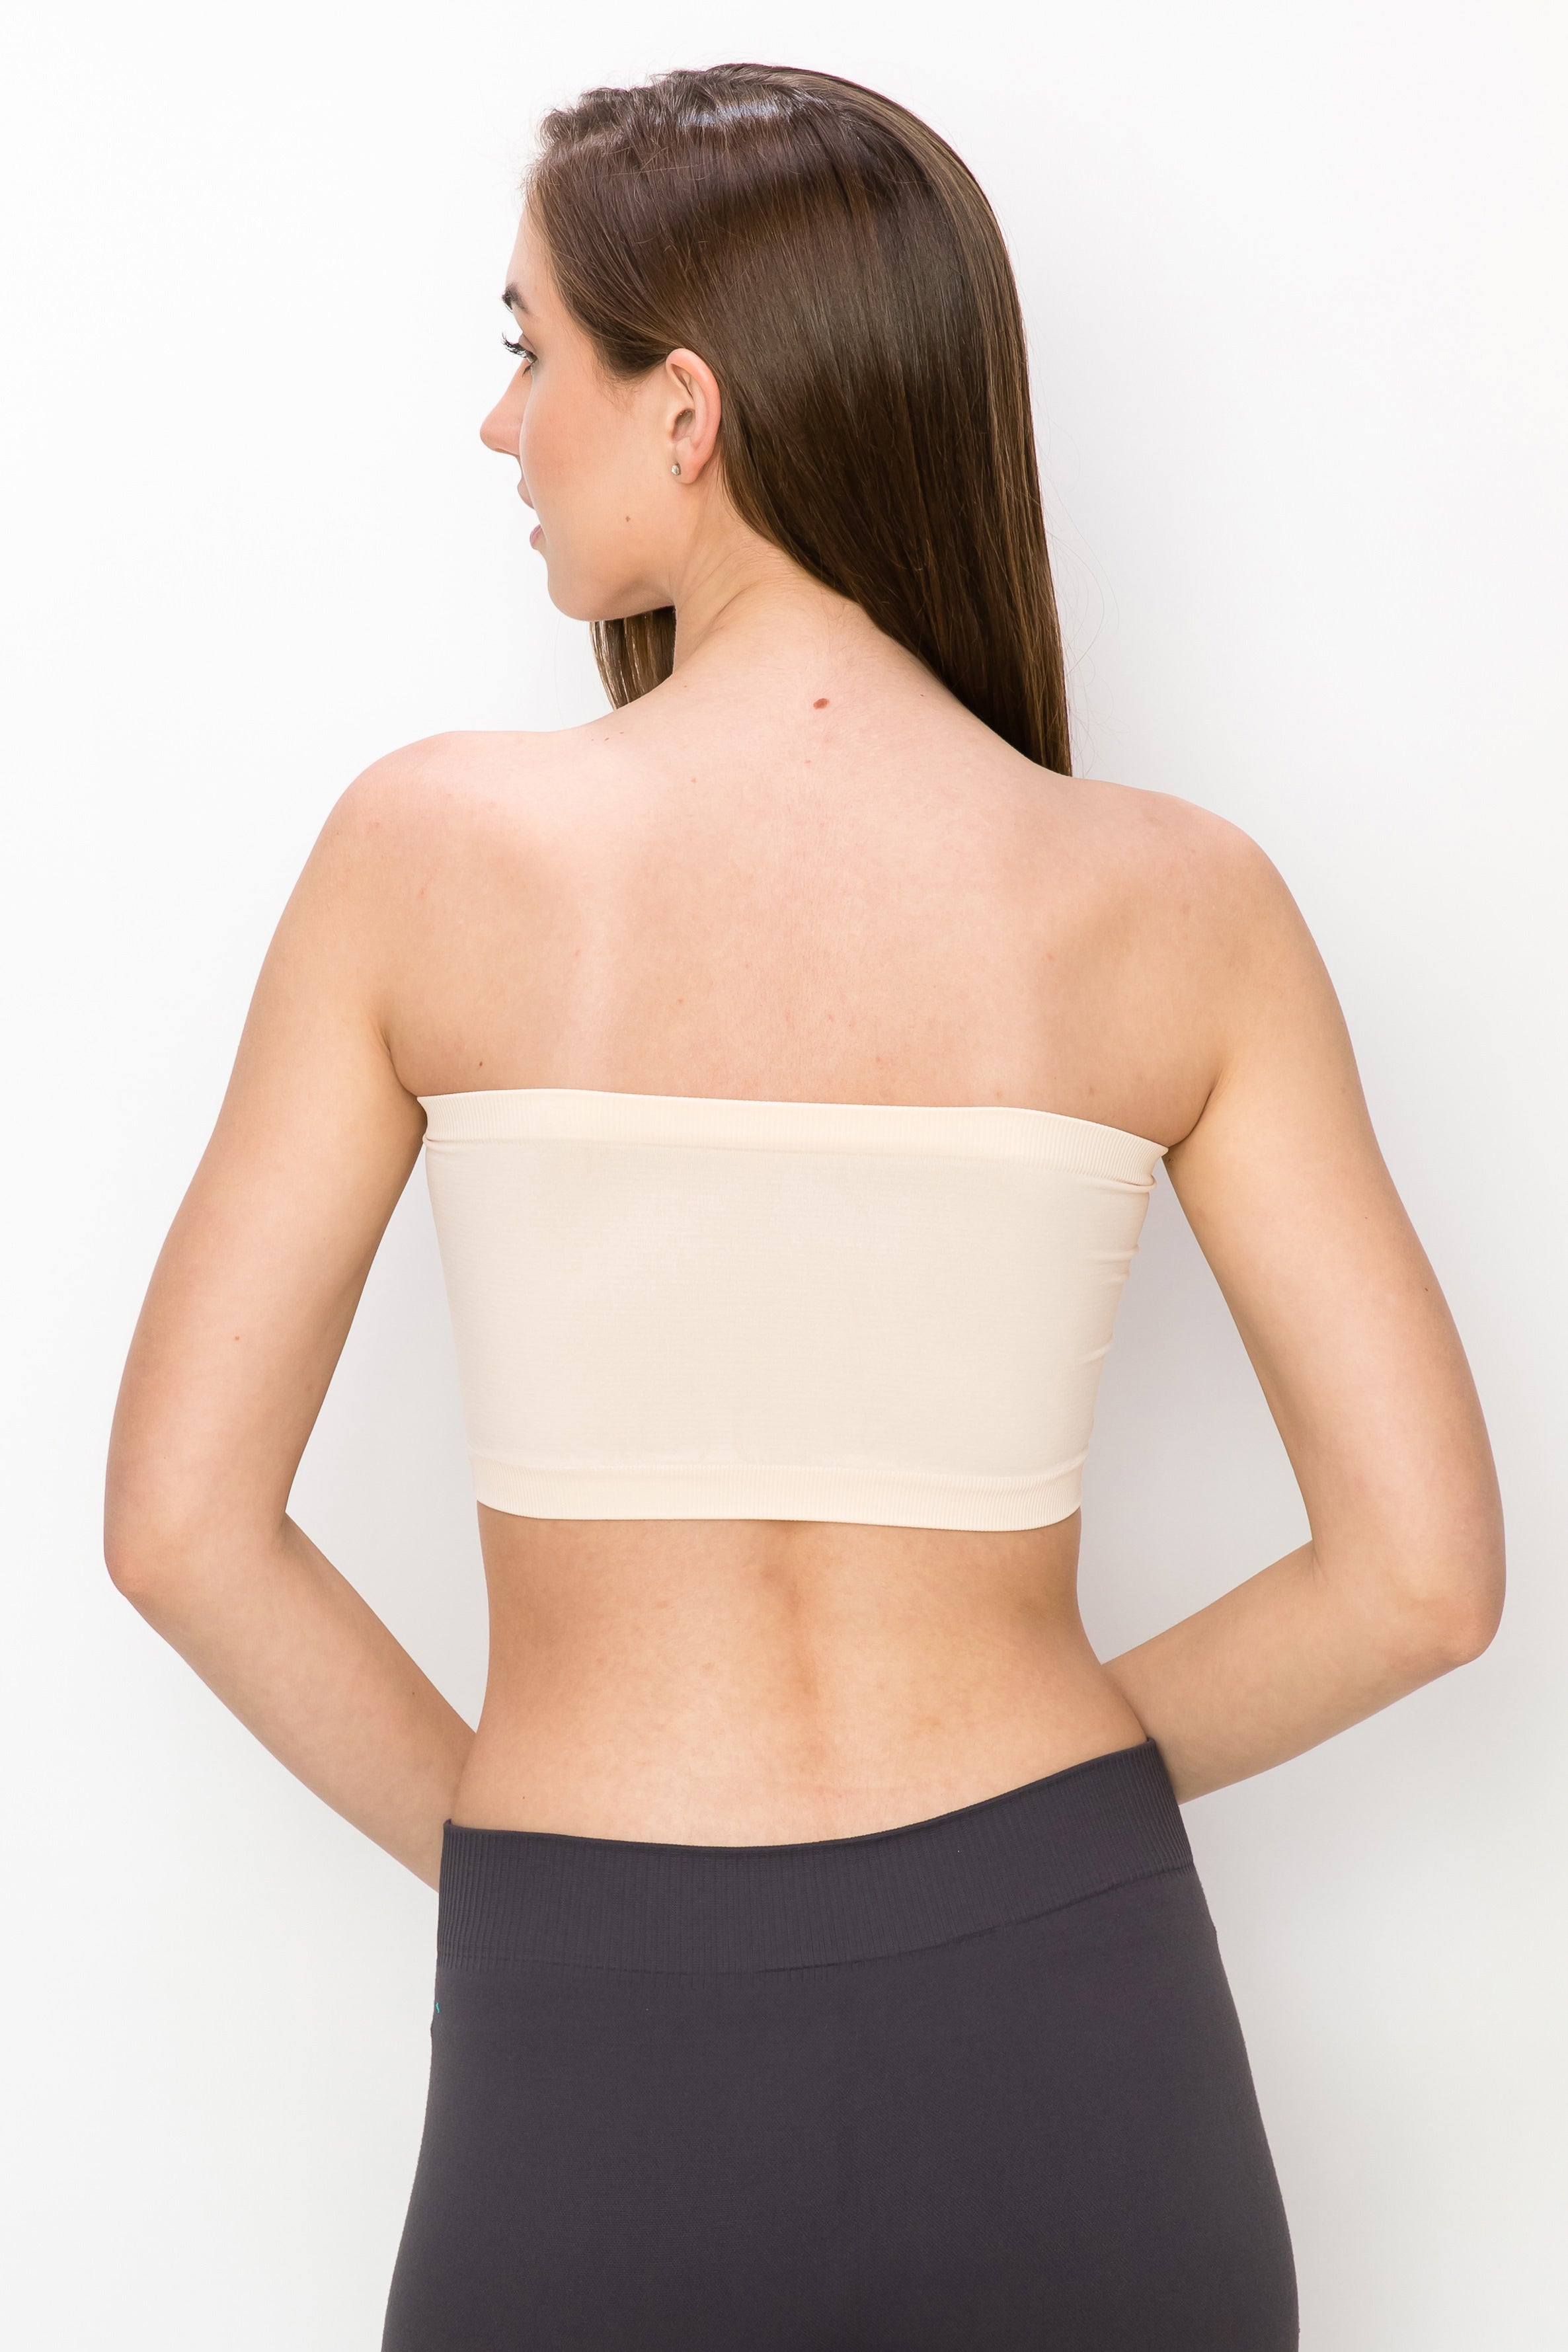 Kurve Medium Length Tube Top with Built-in Shelf Bra, UV Protective Fabric  UPF 50+ (Made with Love in The USA)